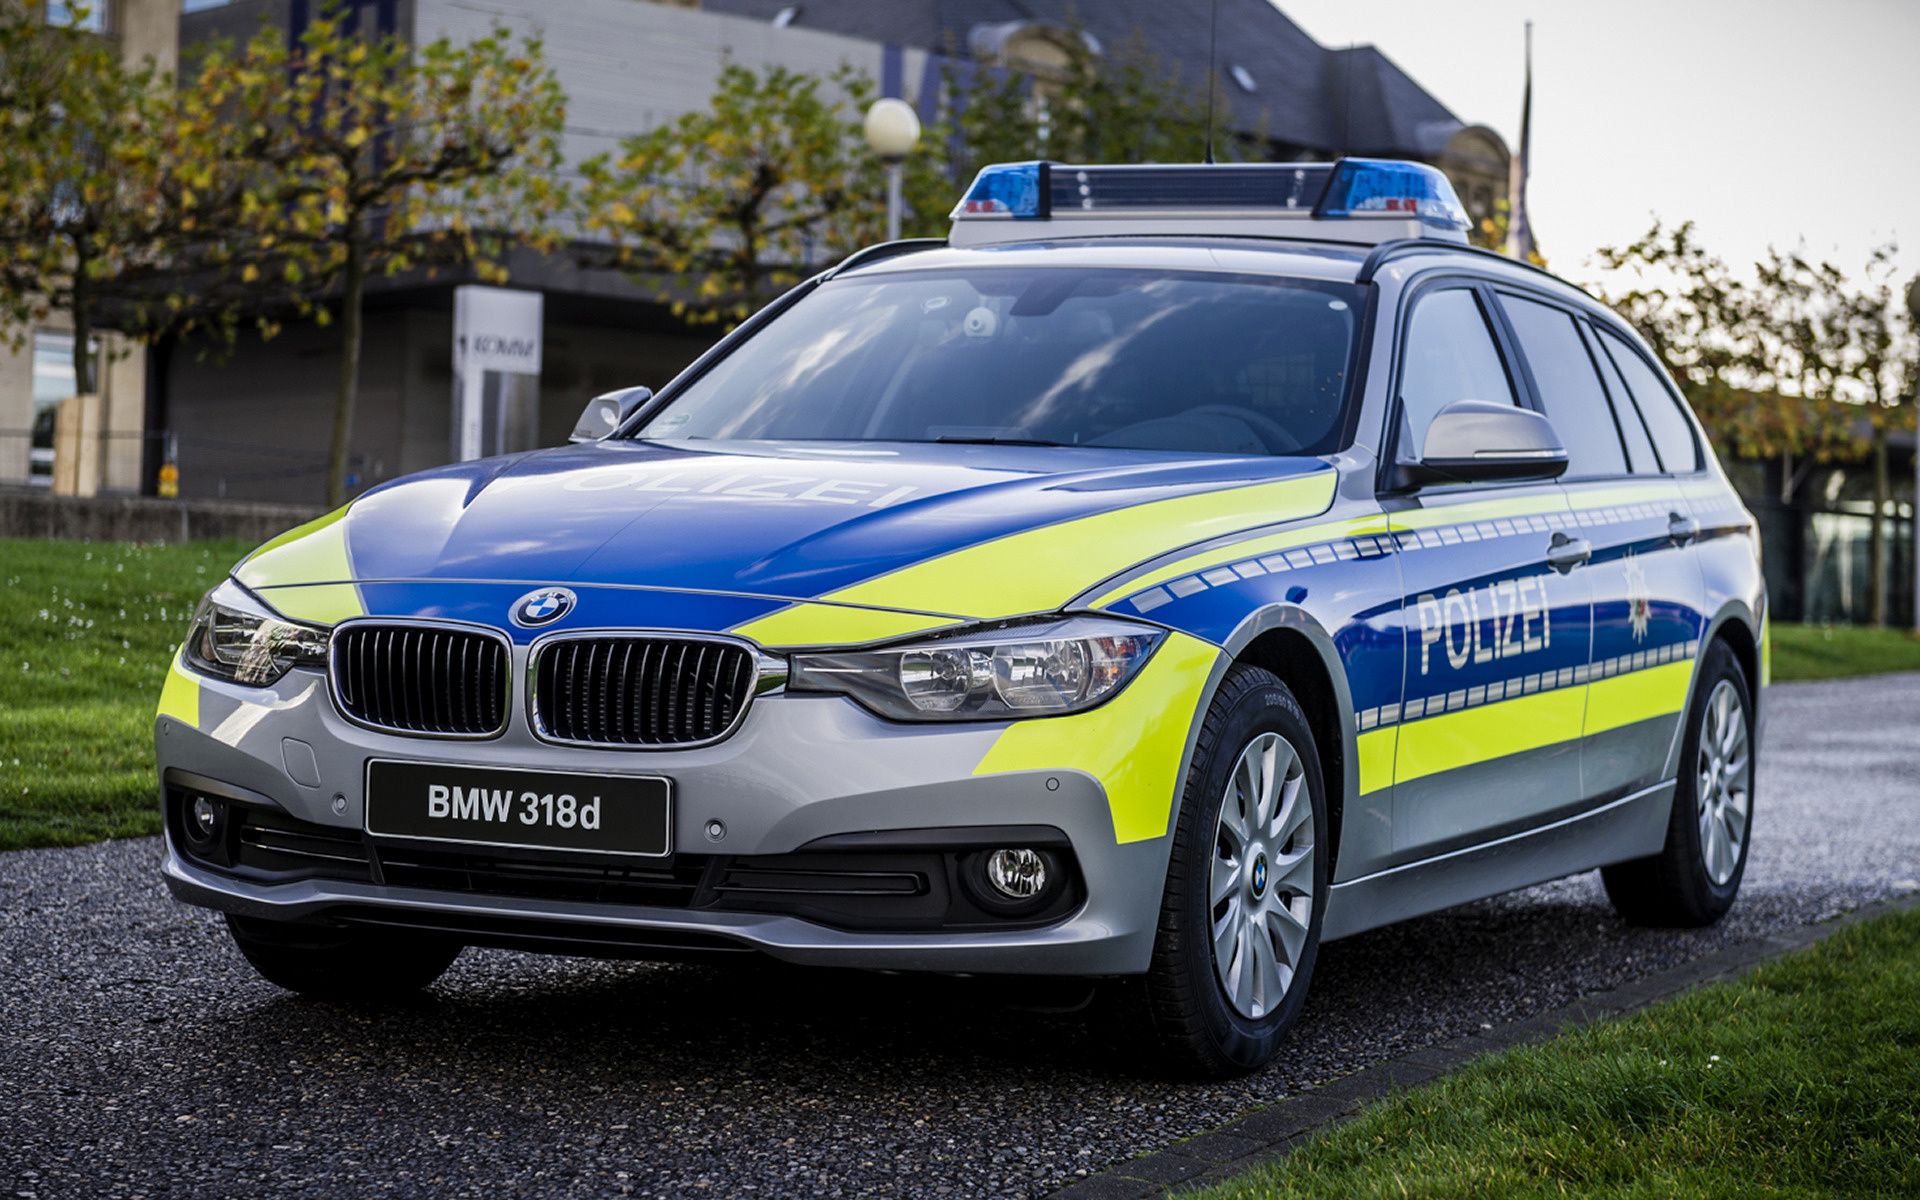 BMW 3 Series Touring Polizei and HD Image. Car